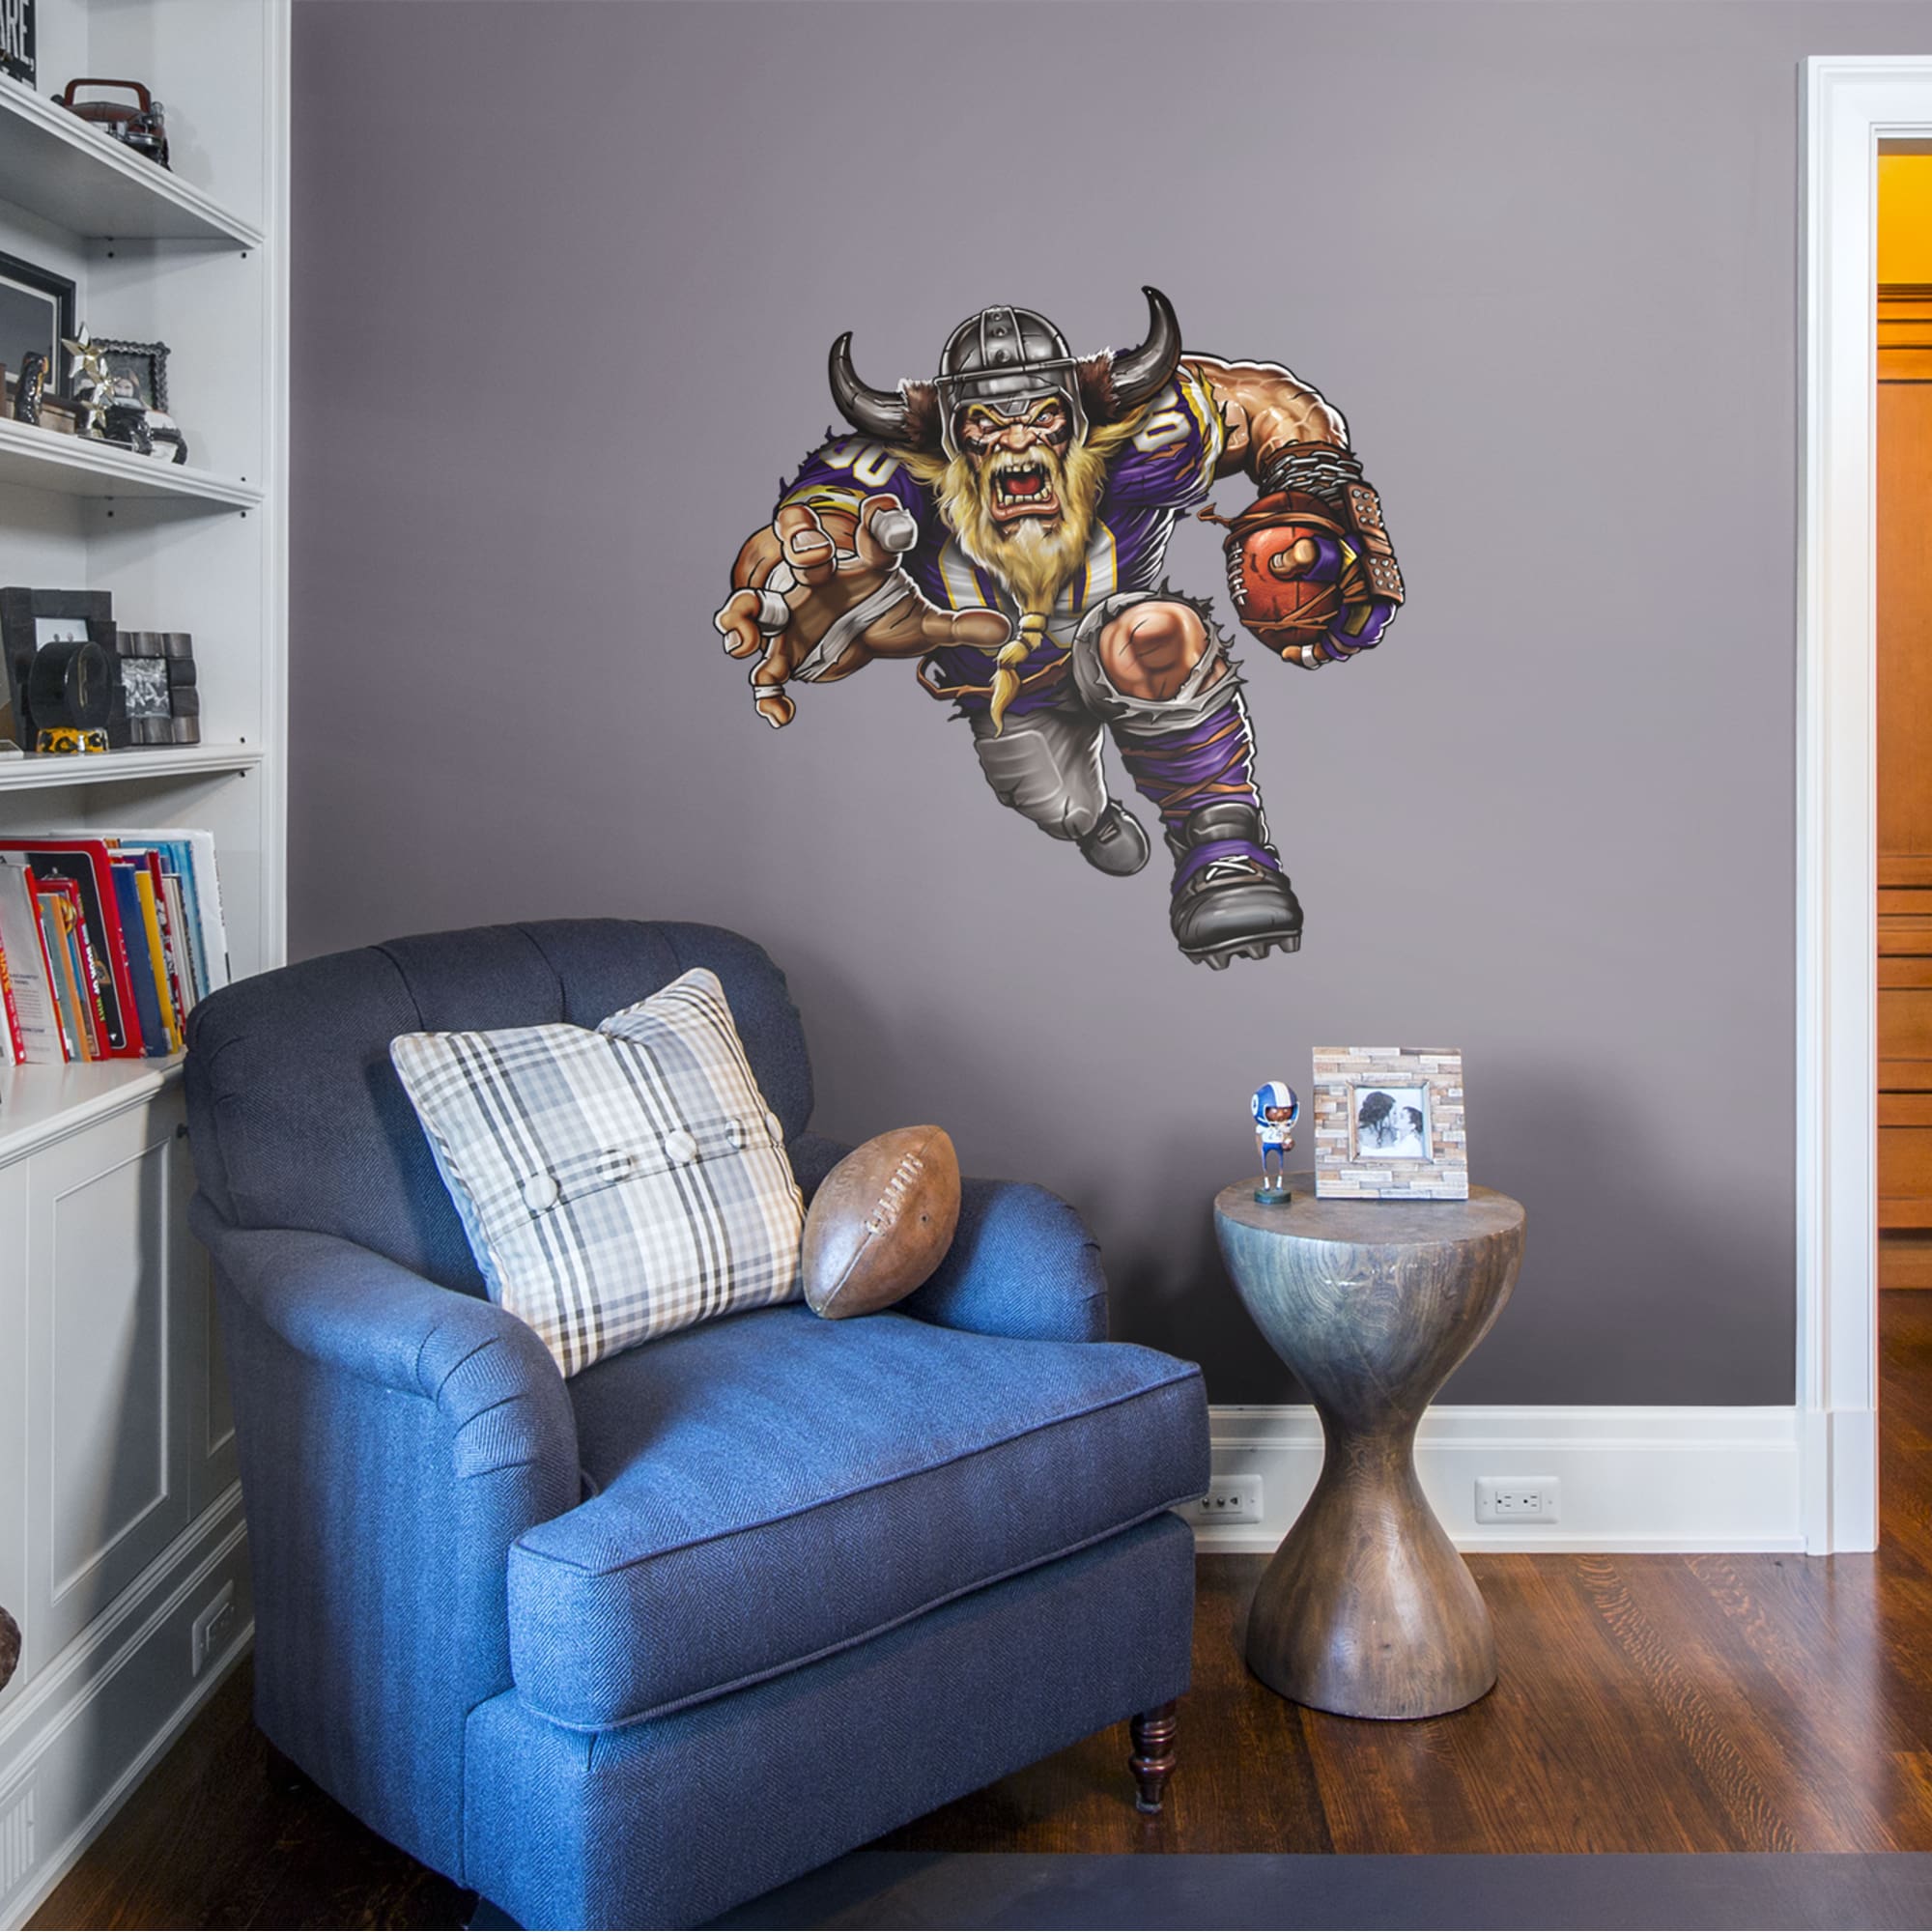 Minnesota Vikings: Vicious Viking - Officially Licensed NFL Removable Wall Decal 38.0"W x 38.0"H by Fathead | Vinyl